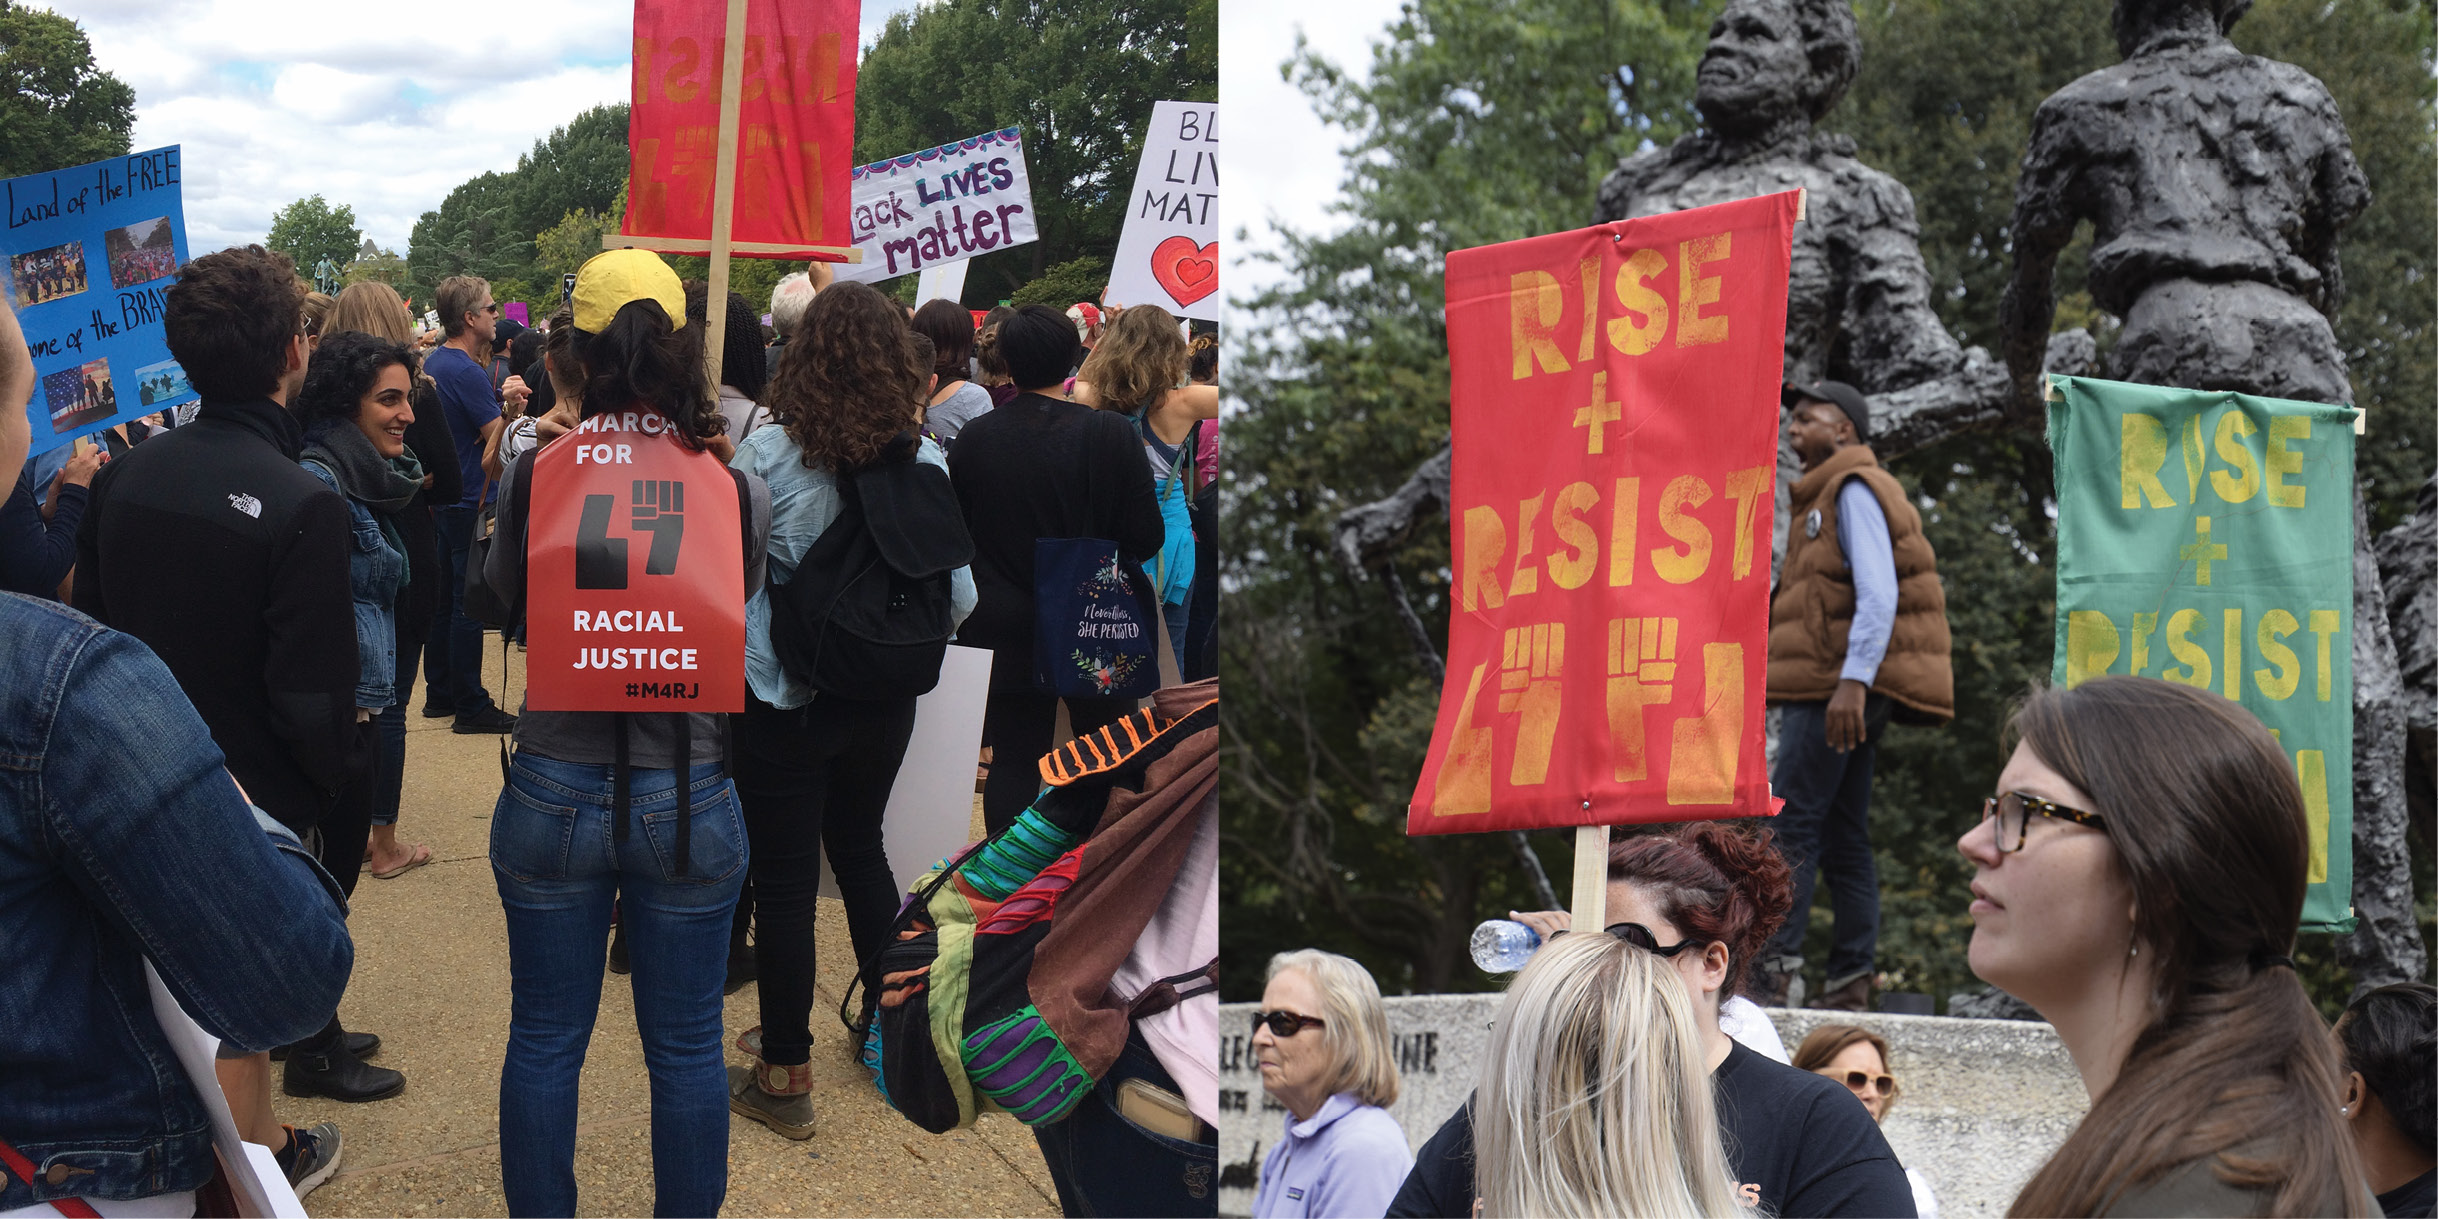 Two images of rally goers and marchers holding signs.